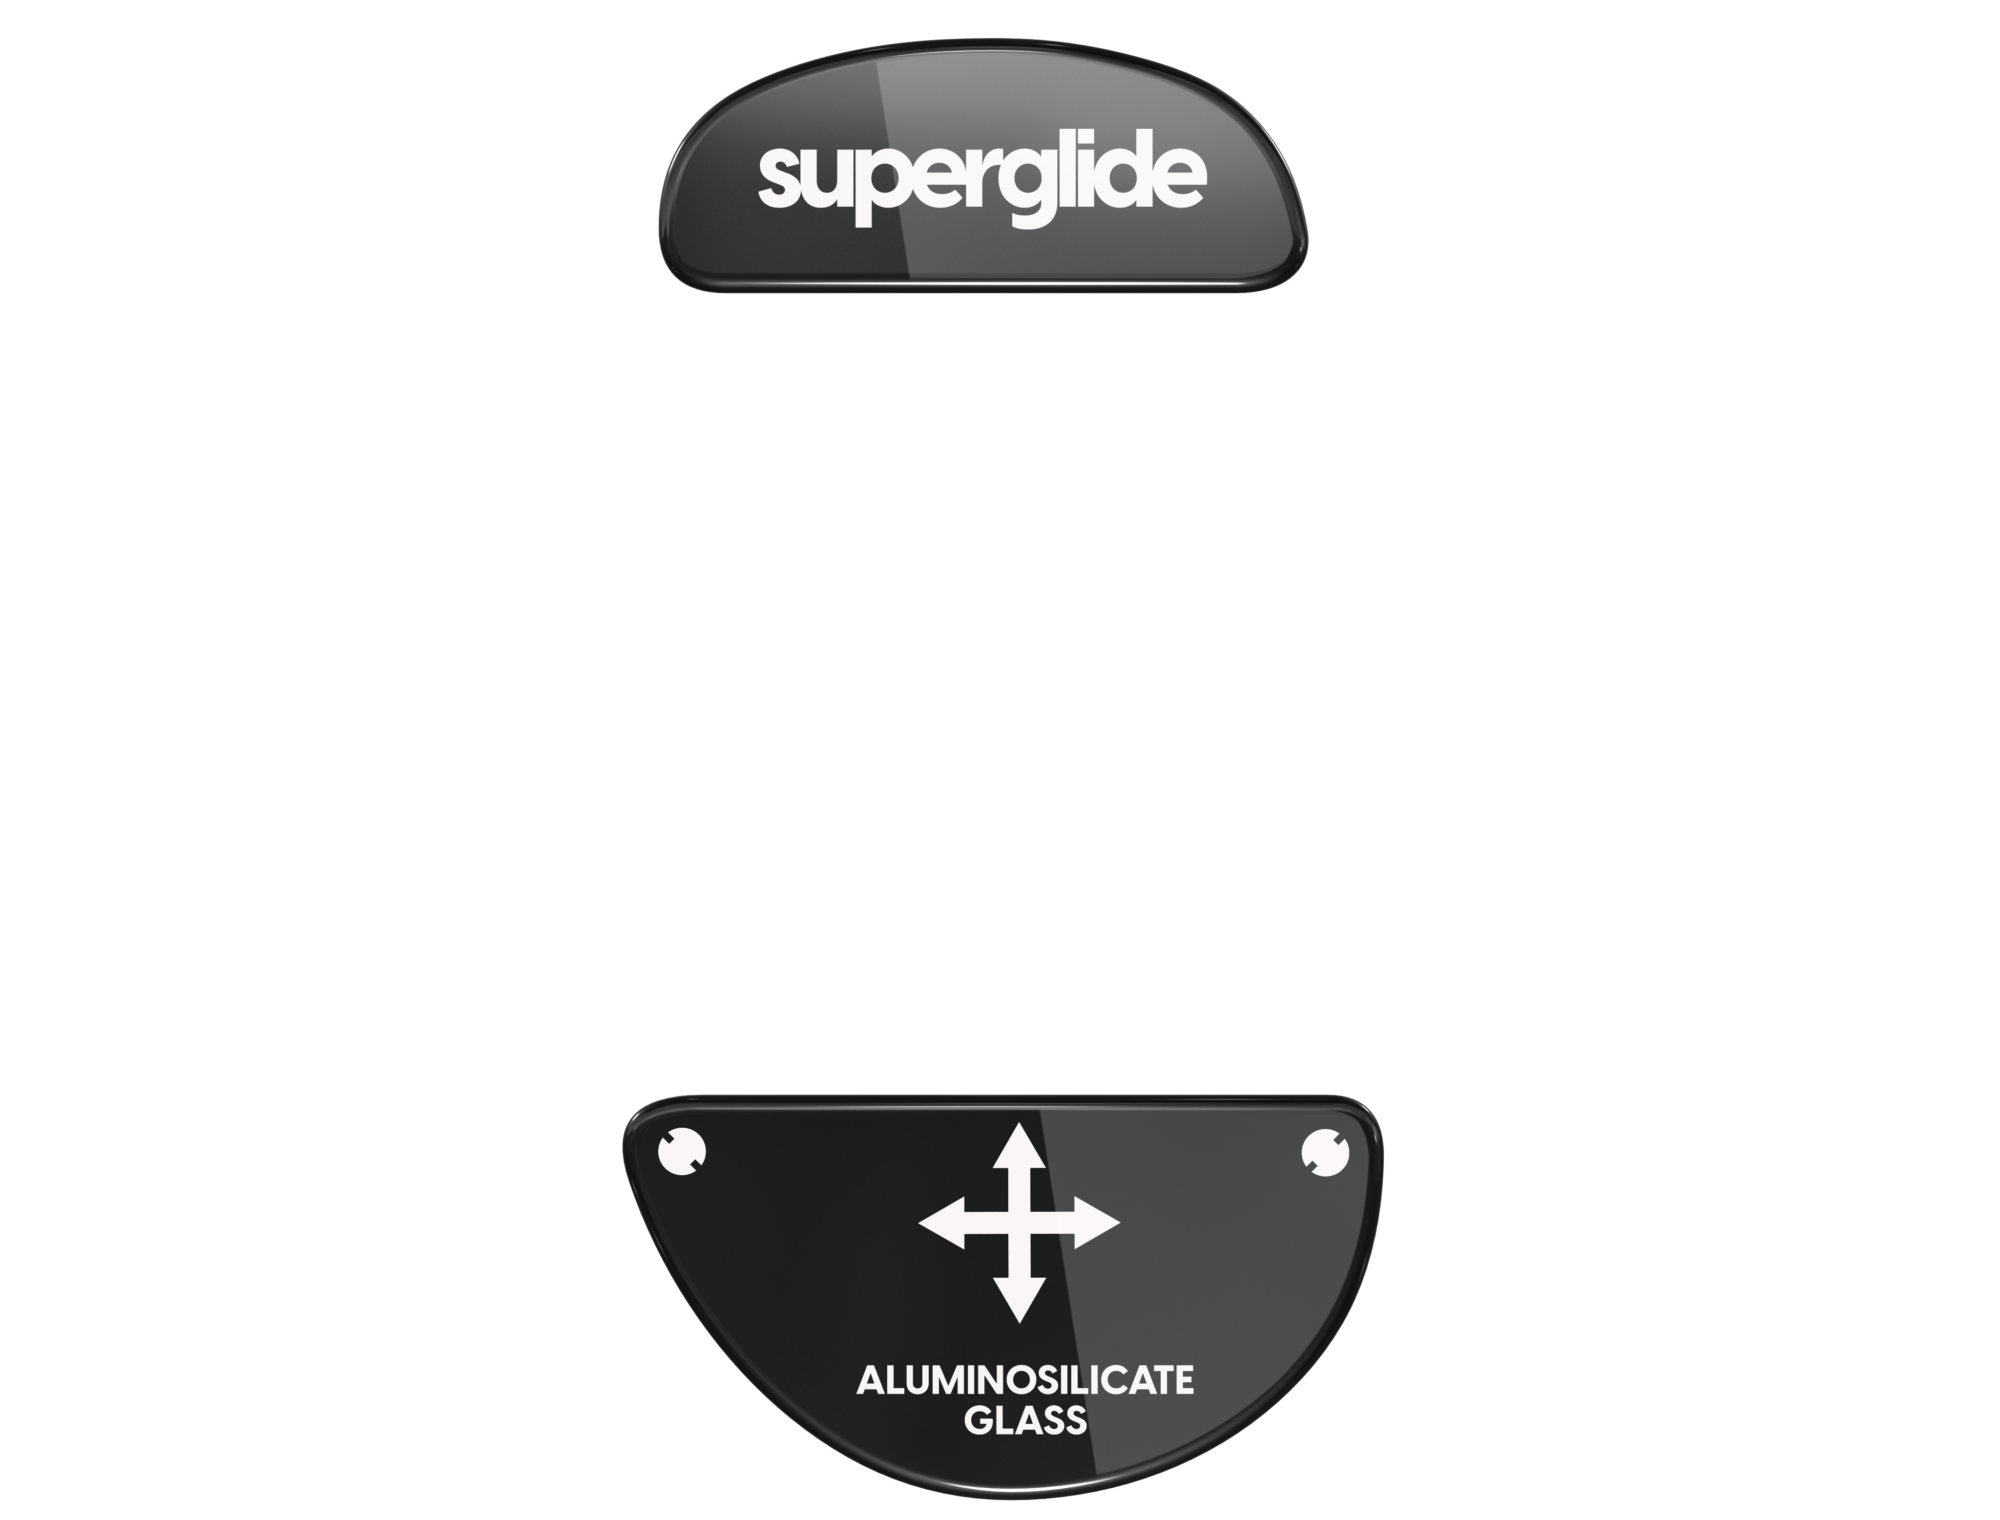 Superglide glass feet for Zowie EC Series